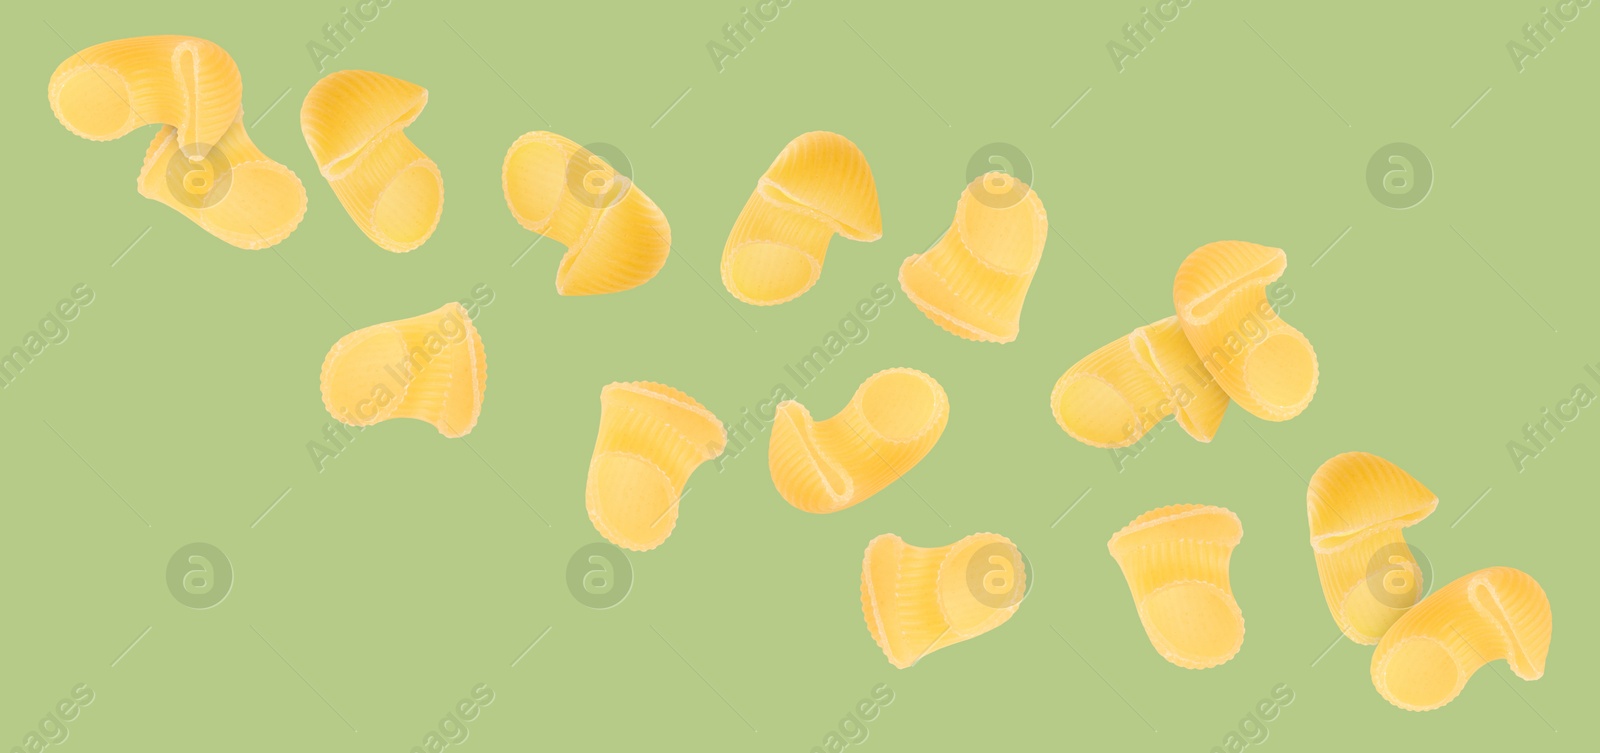 Image of Raw horns pasta flying on green background